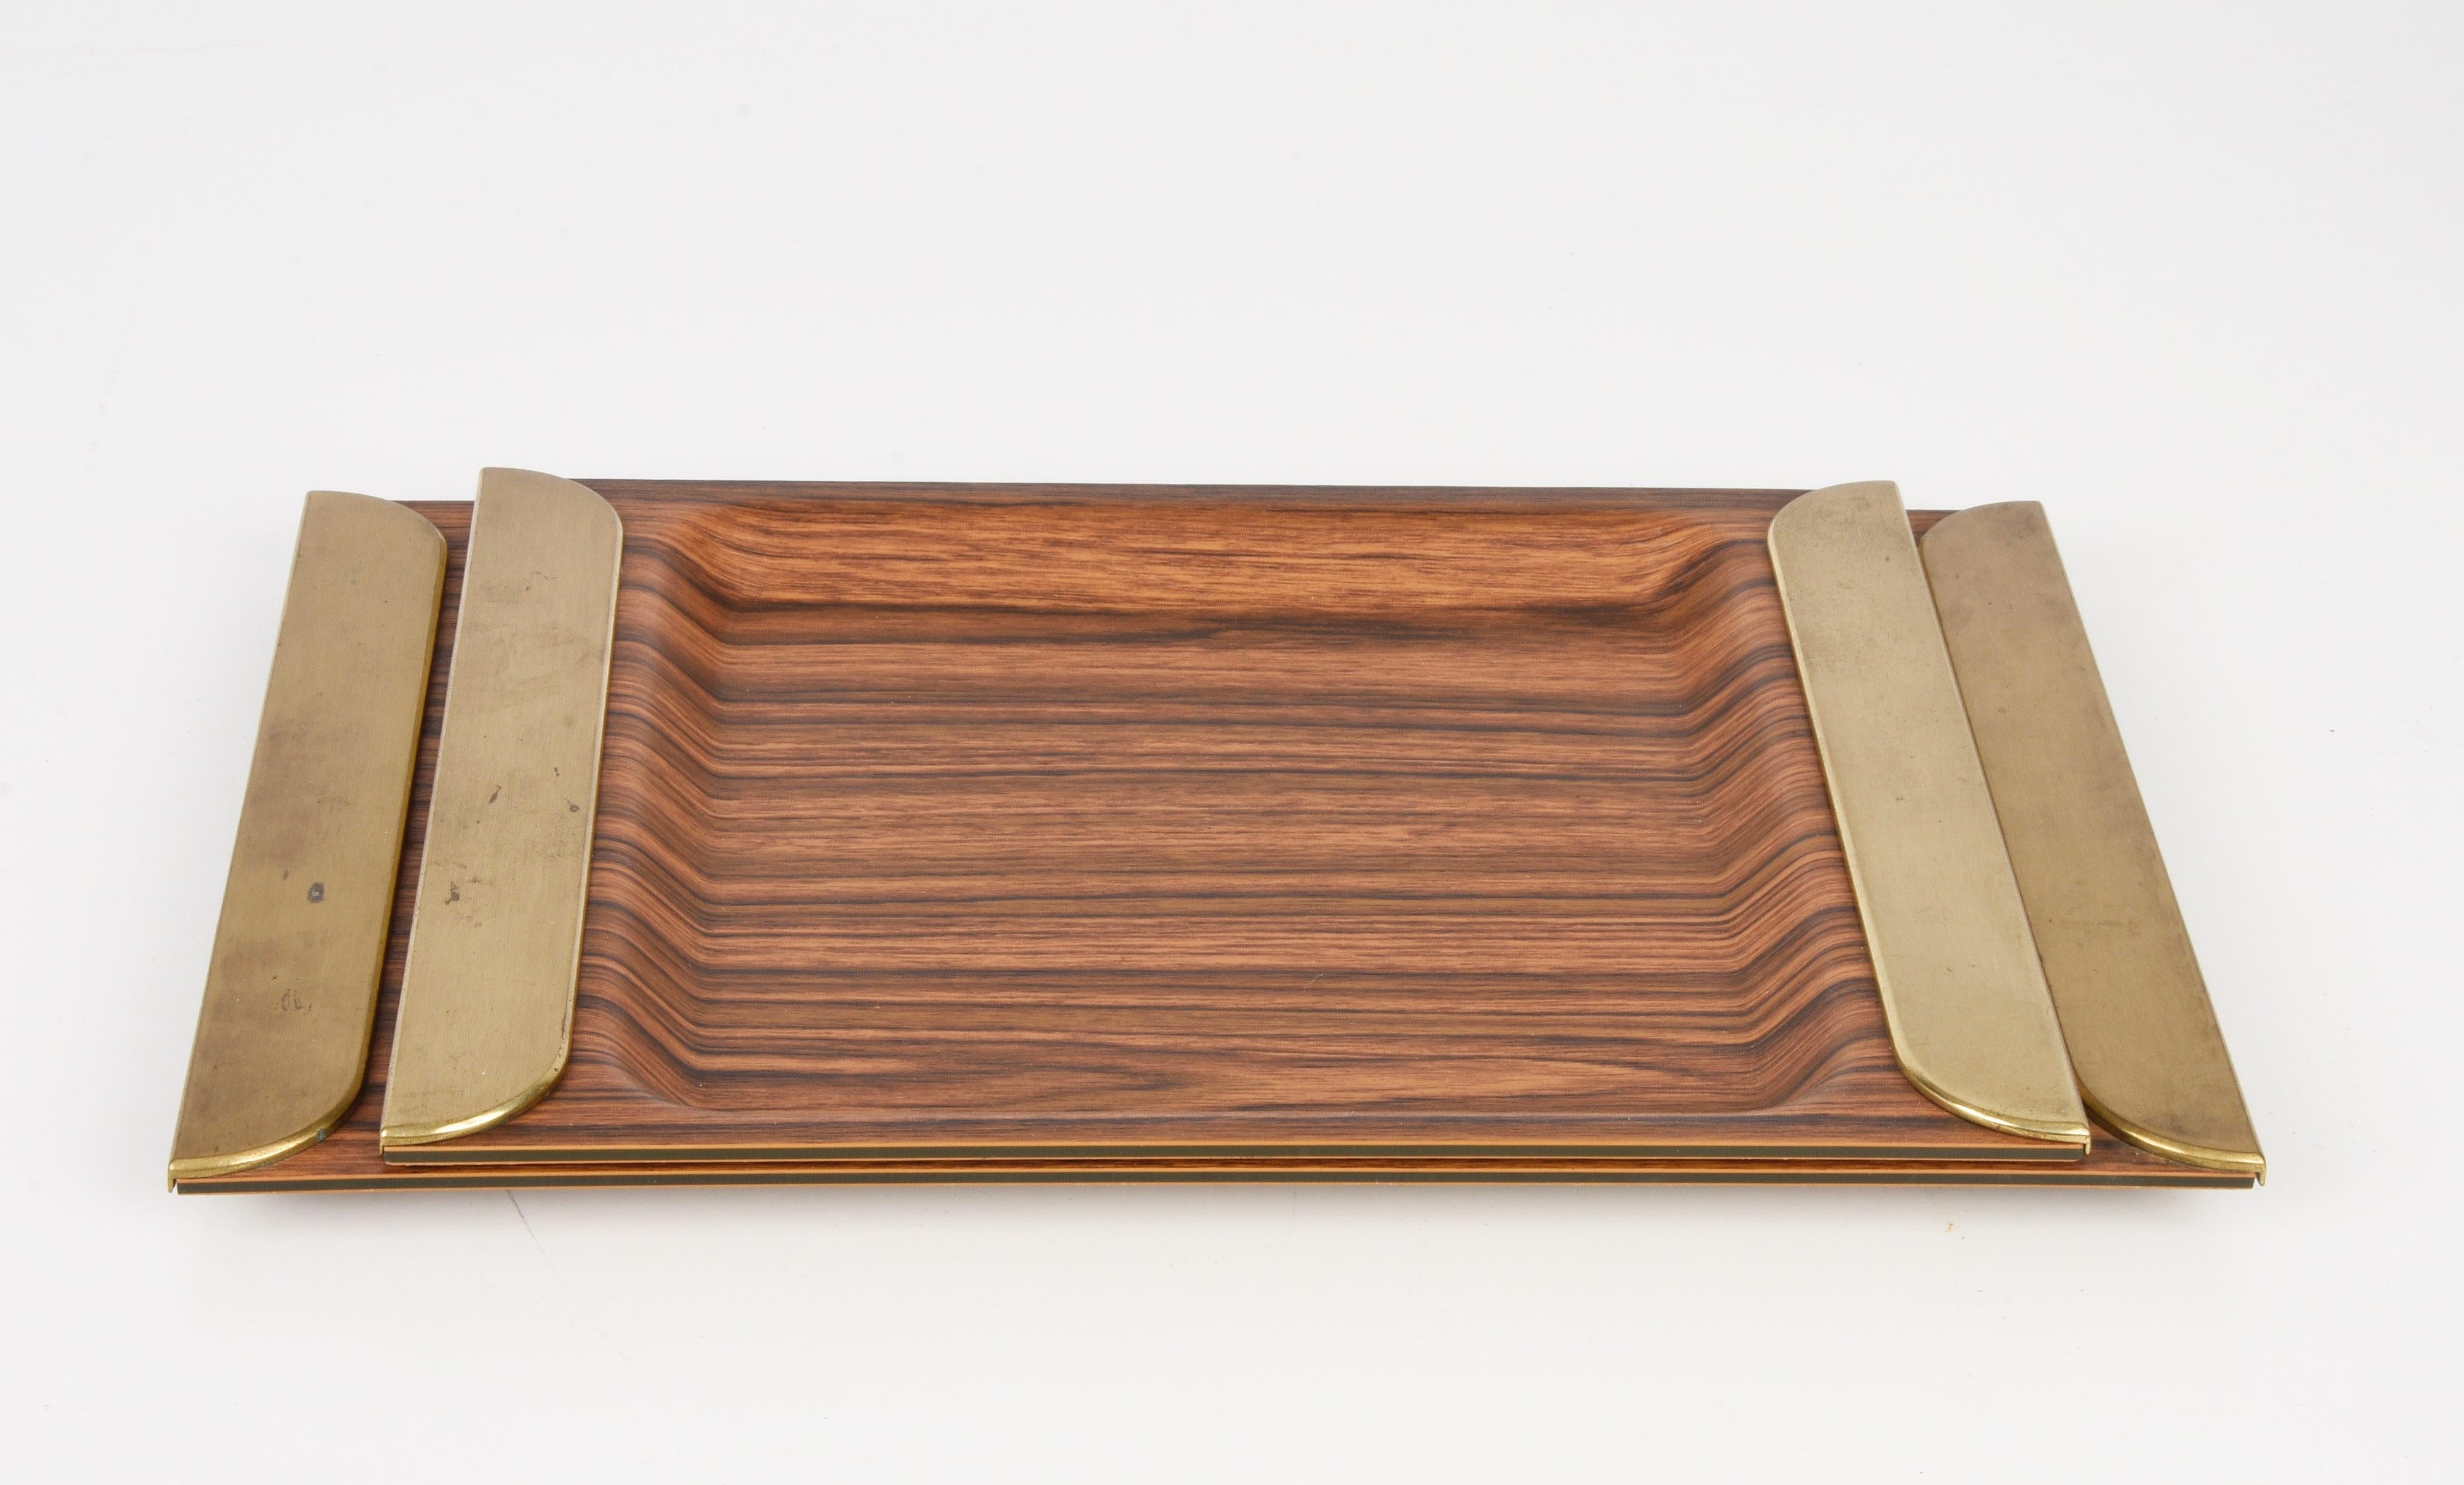  Pair of Midcentury Laminate and Brass Italian Trays Serving Pieces, 1970s For Sale 4